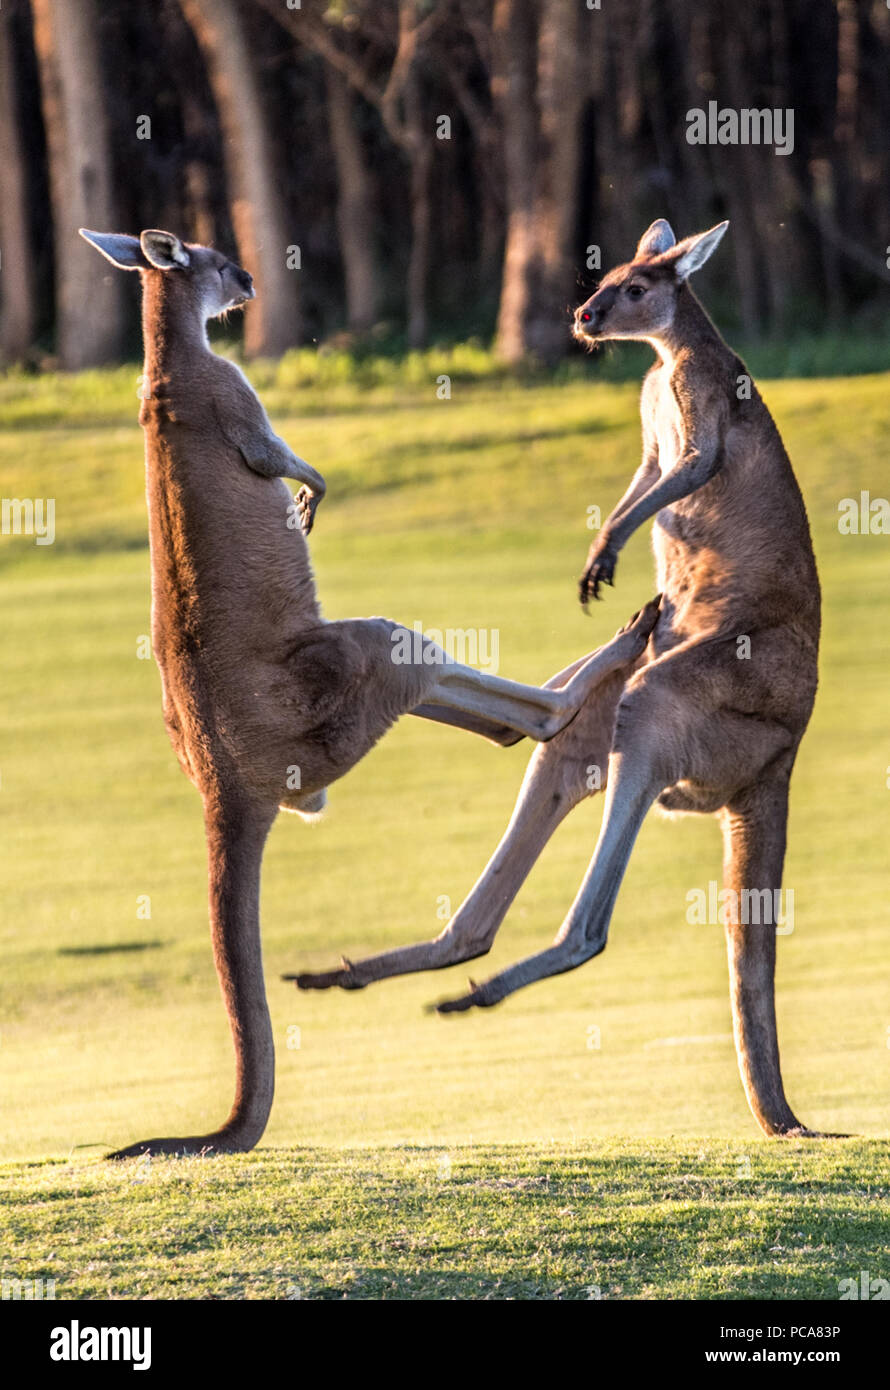 bacon emulering adelig Kangaroos fighting, Ellenbrook, Western Australia. Male kangaroos fight for  dominance and the right to mate with females in their 'mob' in spring time  Stock Photo - Alamy